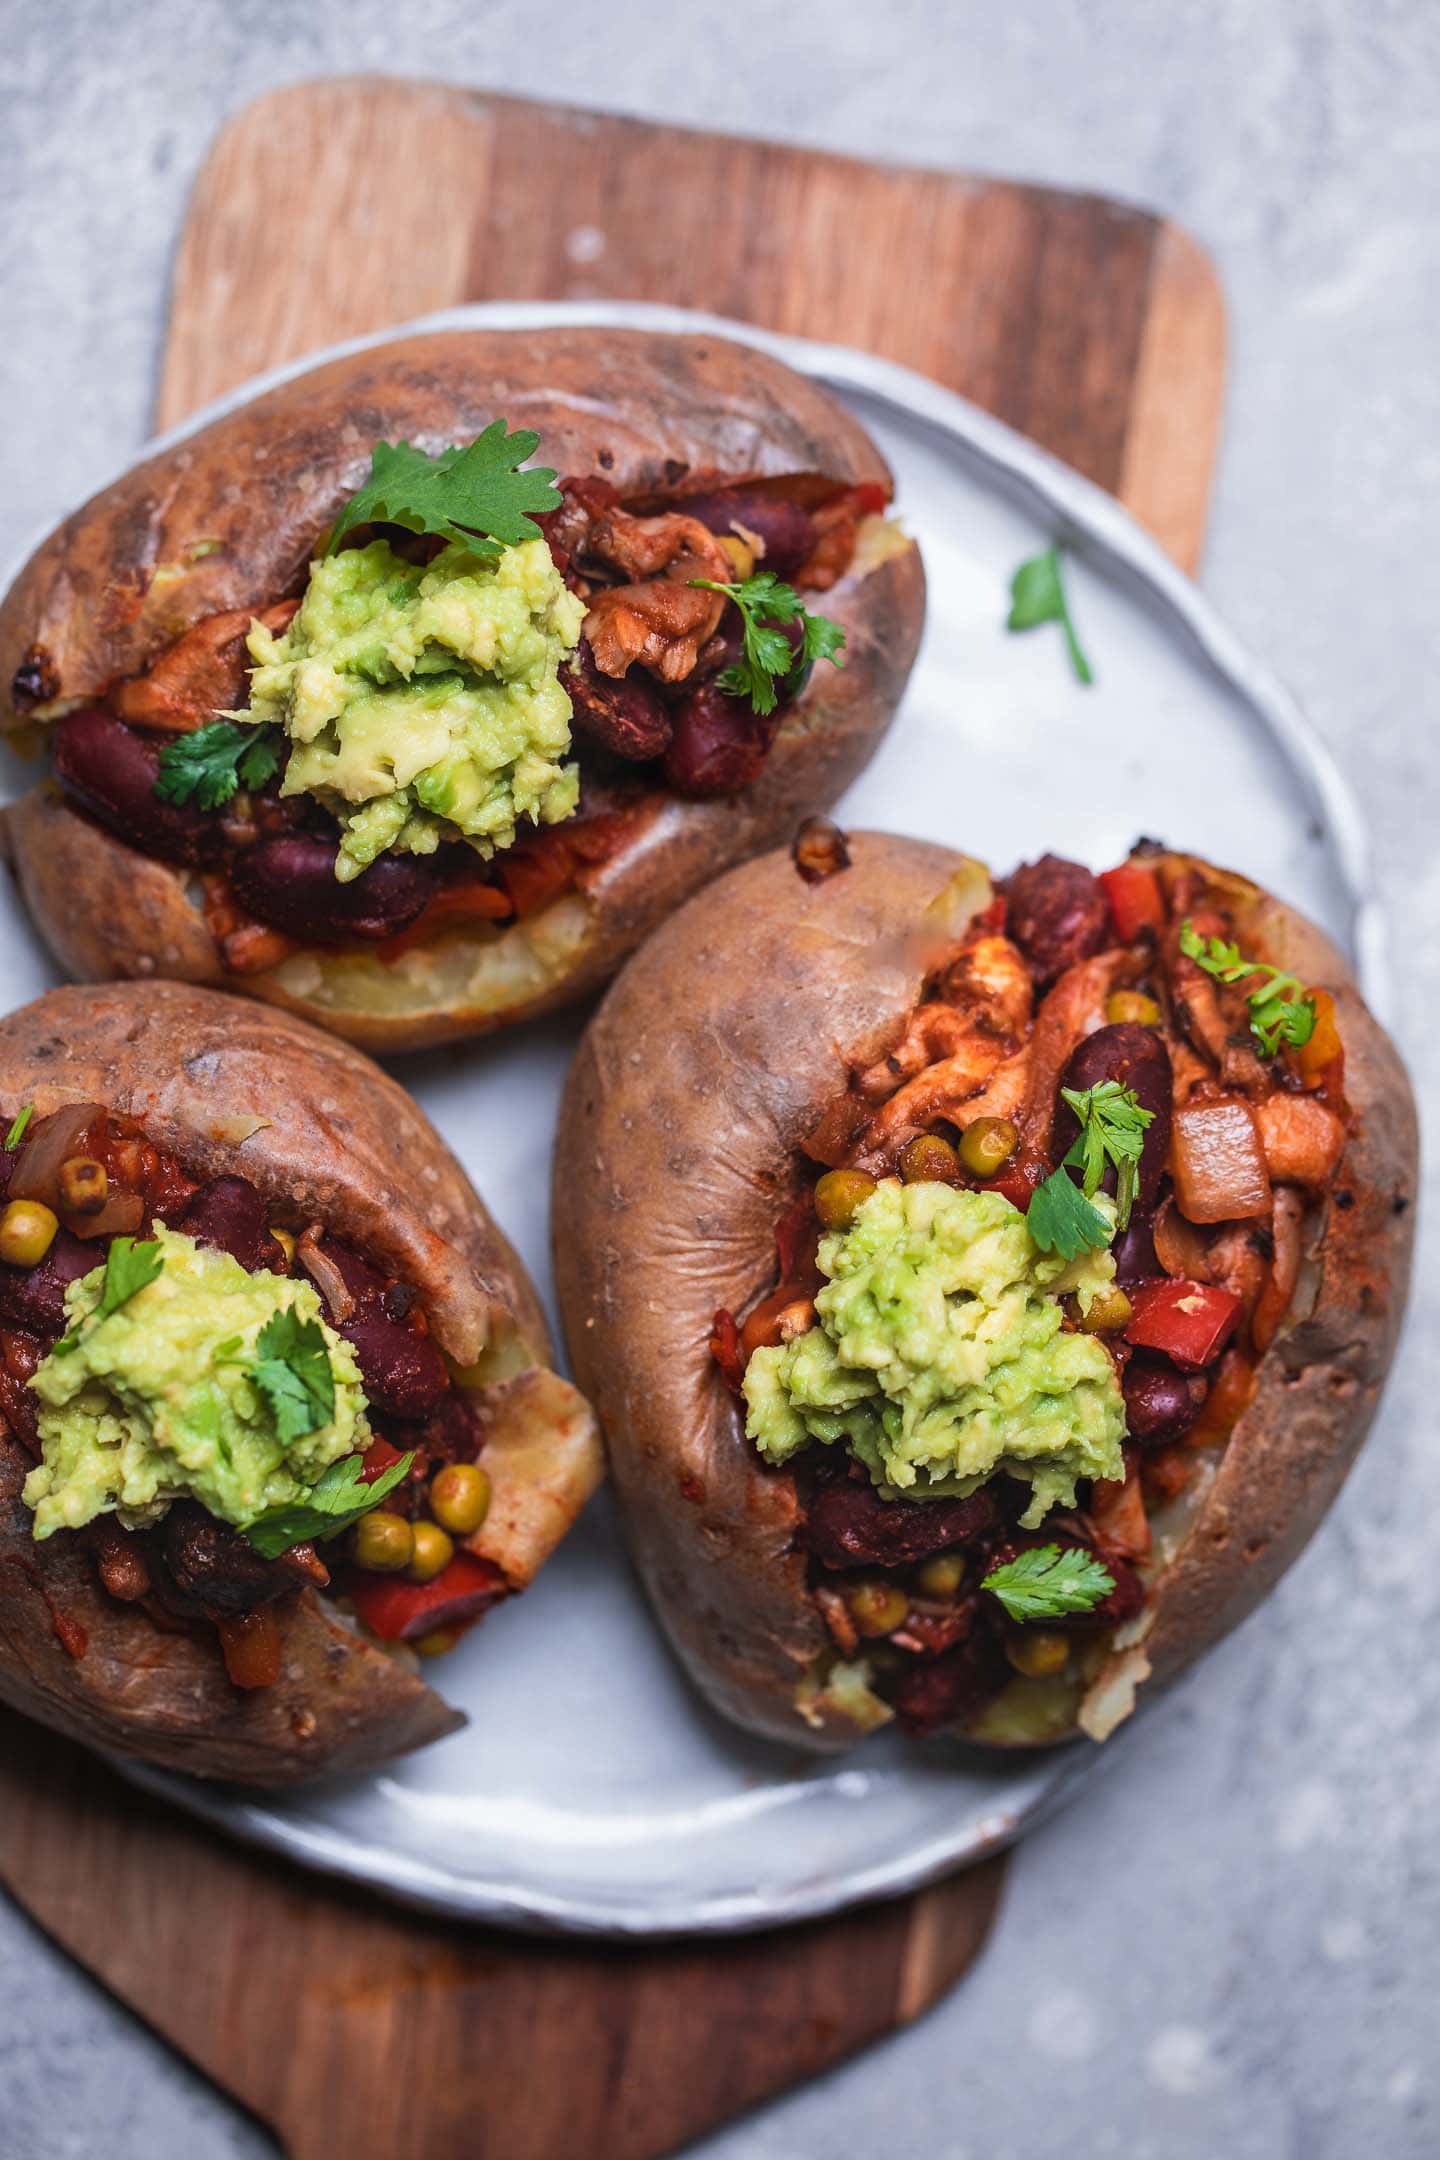 Baked potatoes with kidney beans and mashed avocado